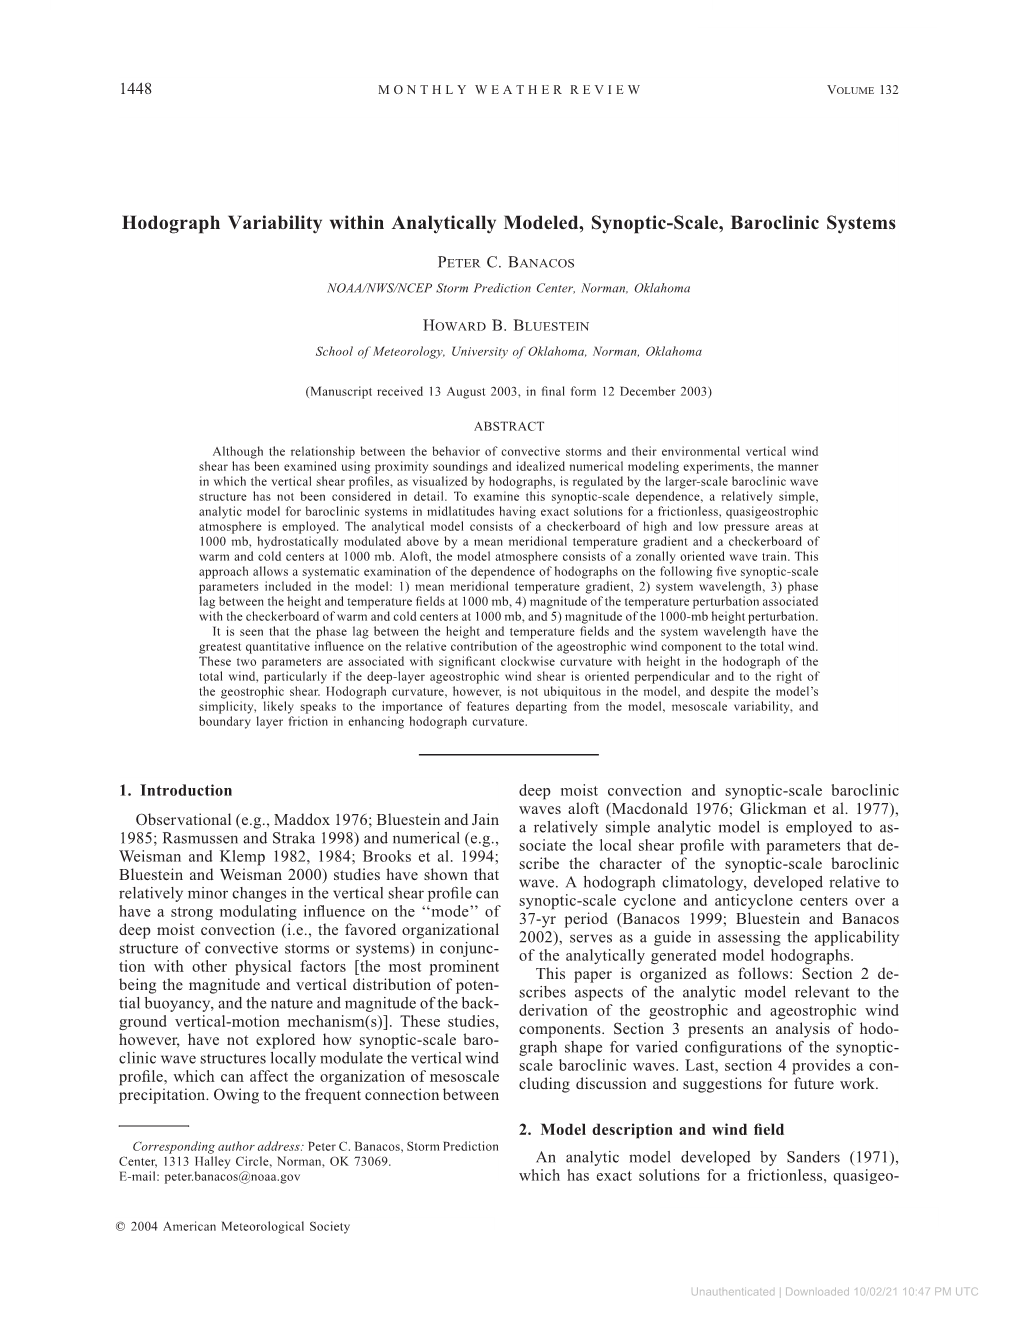 Hodograph Variability Within Analytically Modeled, Synoptic-Scale, Baroclinic Systems